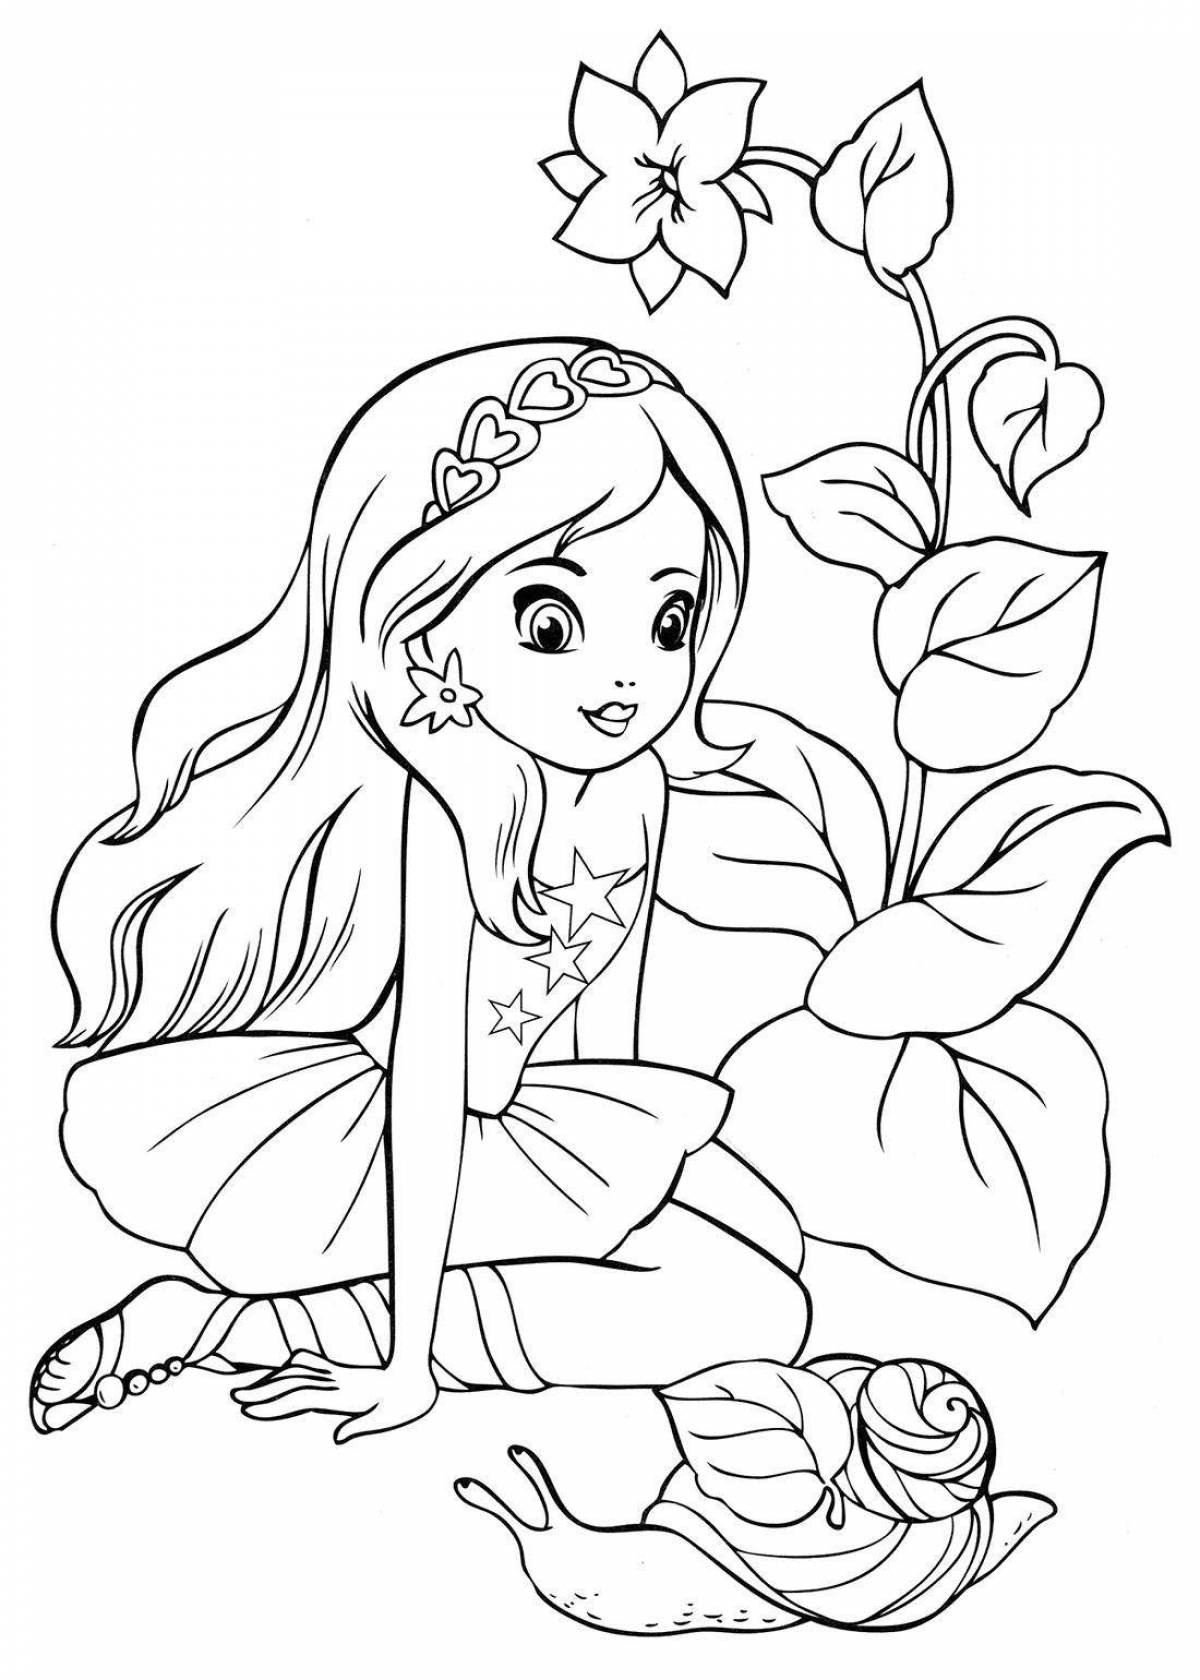 Fancy coloring book for girls 7-8 years old